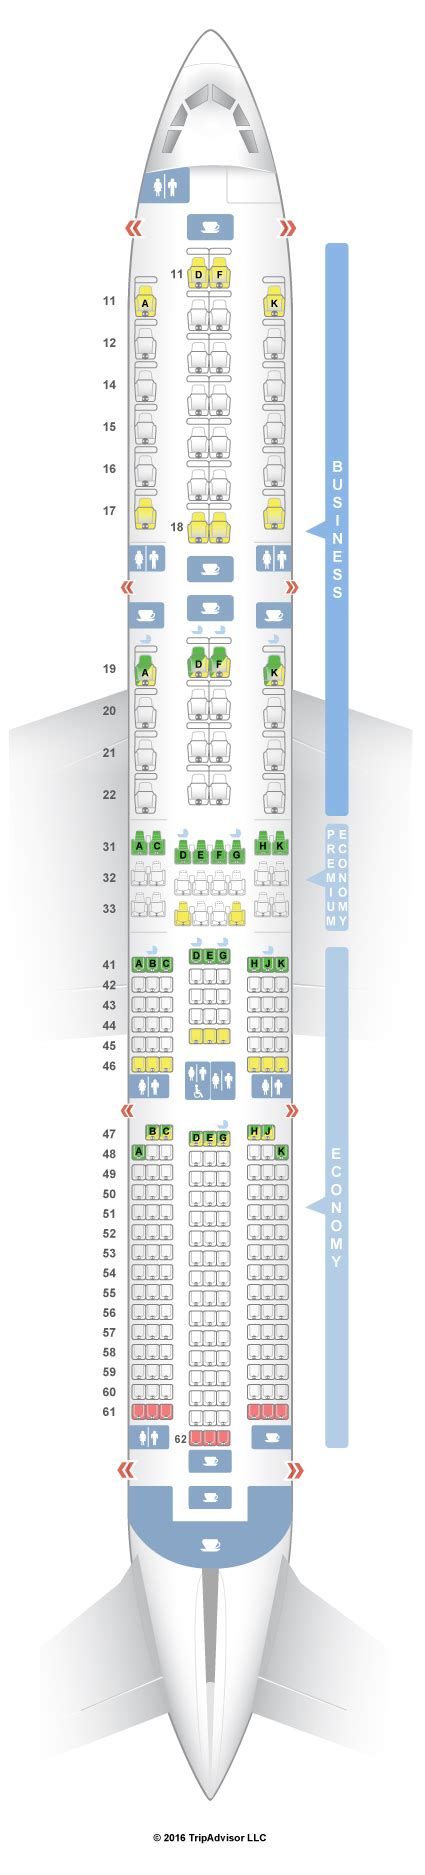 Singapore Airlines Seat Chart